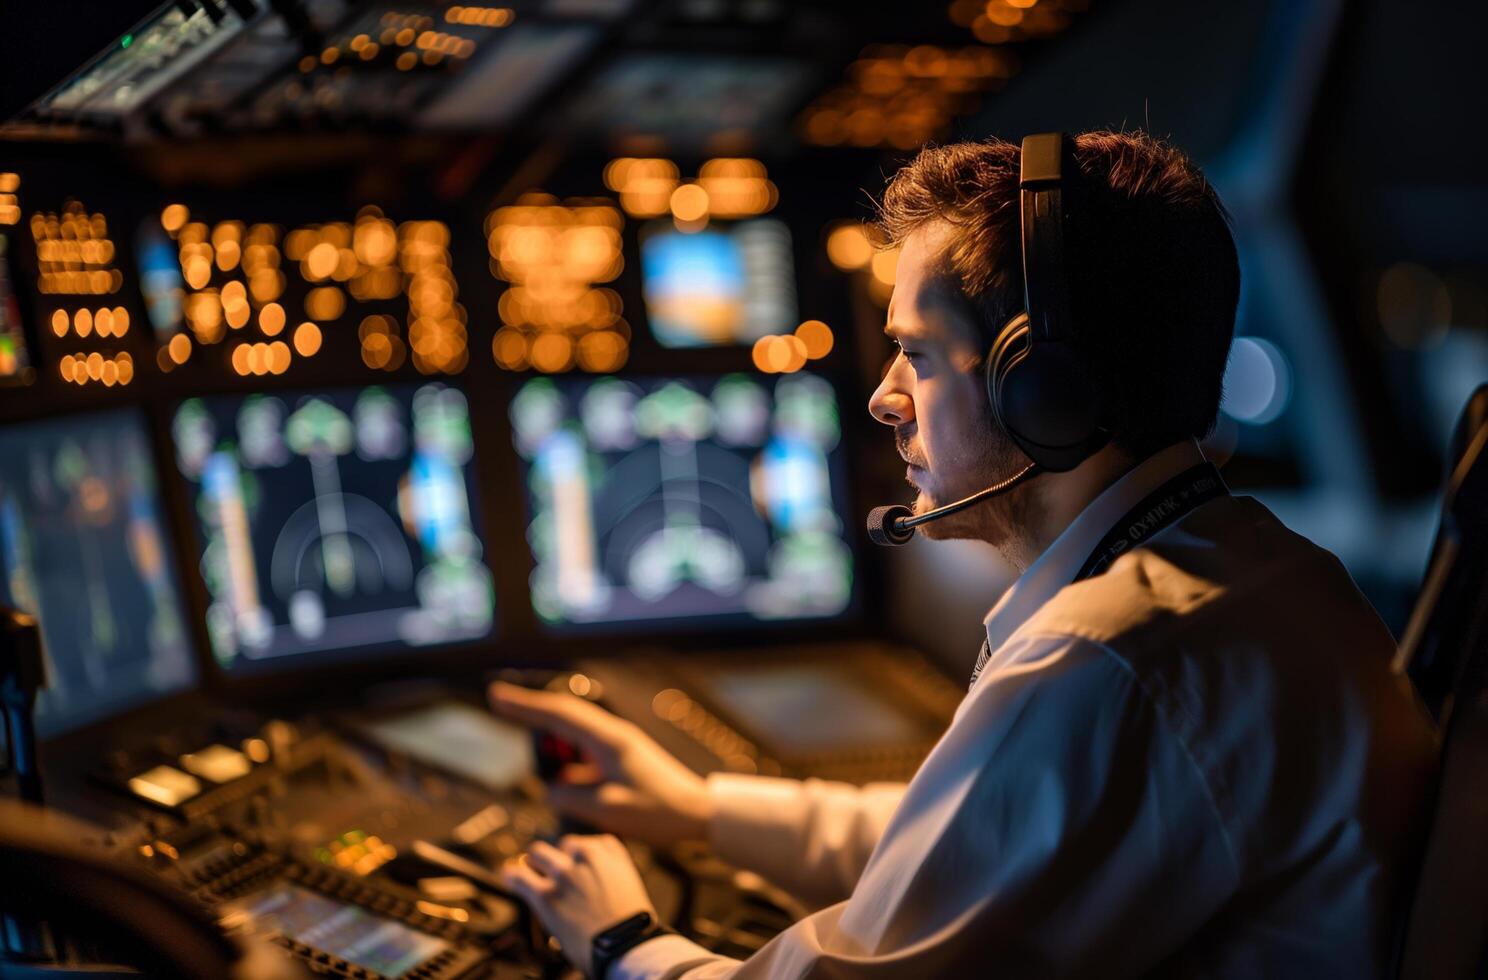 Air traffic controller at work photo